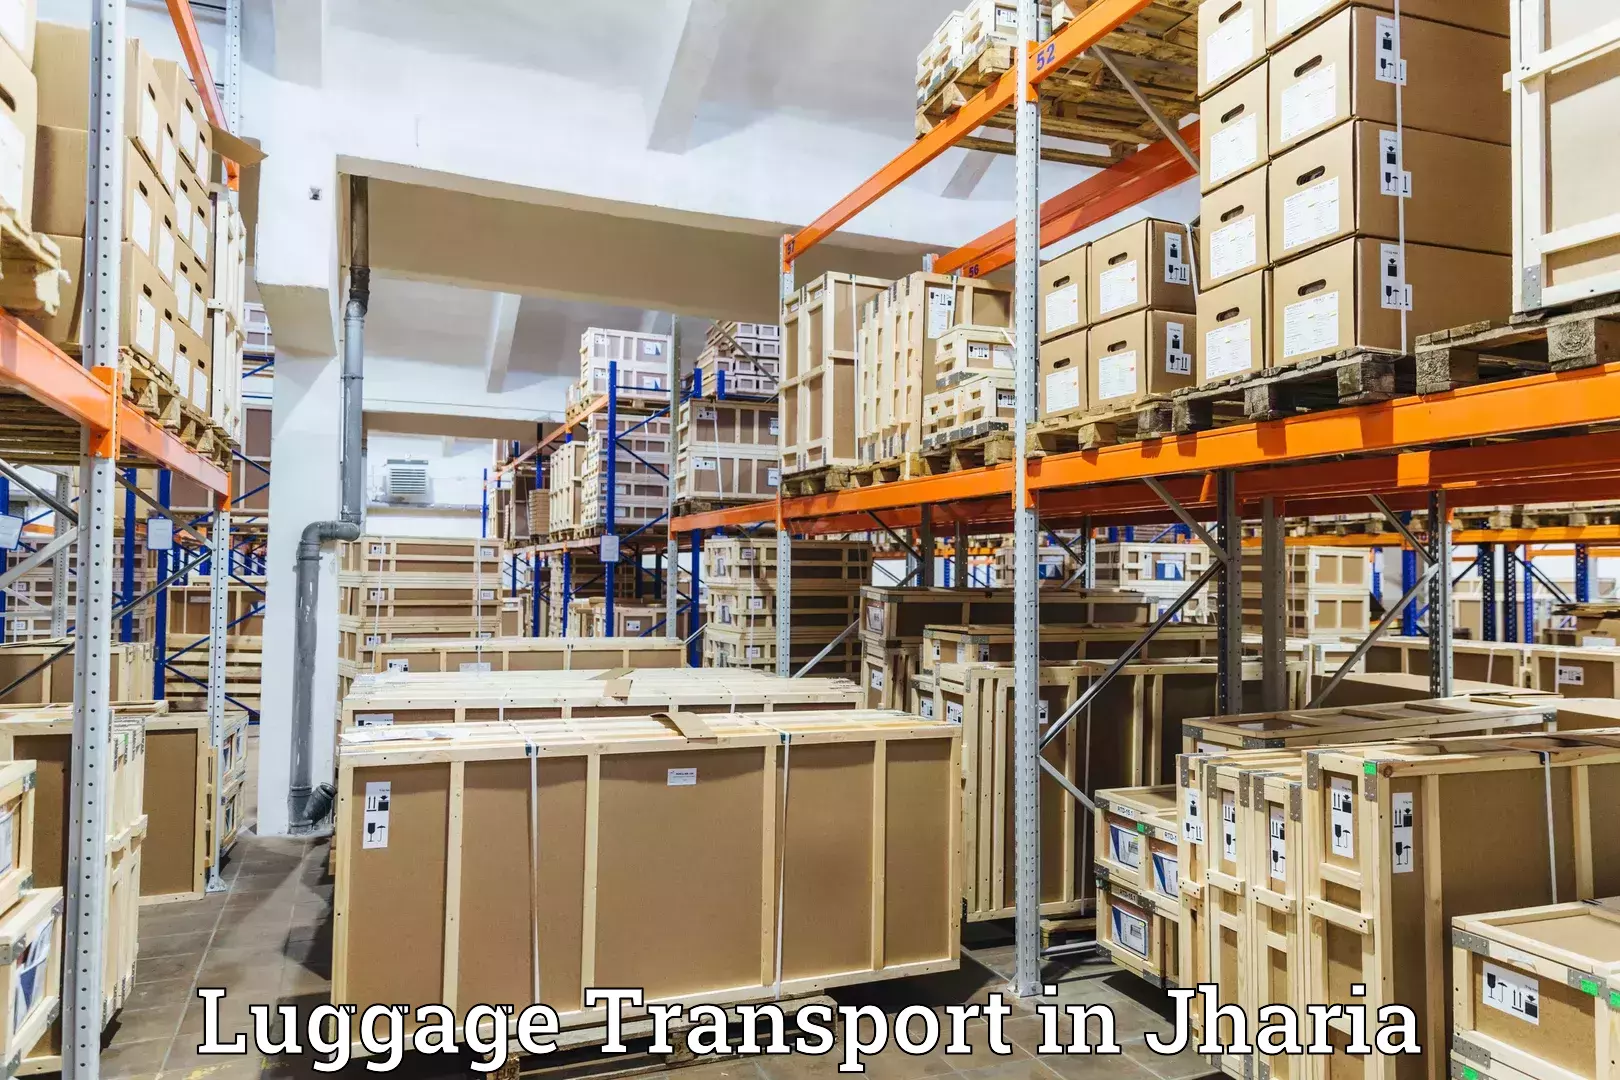 Luggage transport solutions in Jharia